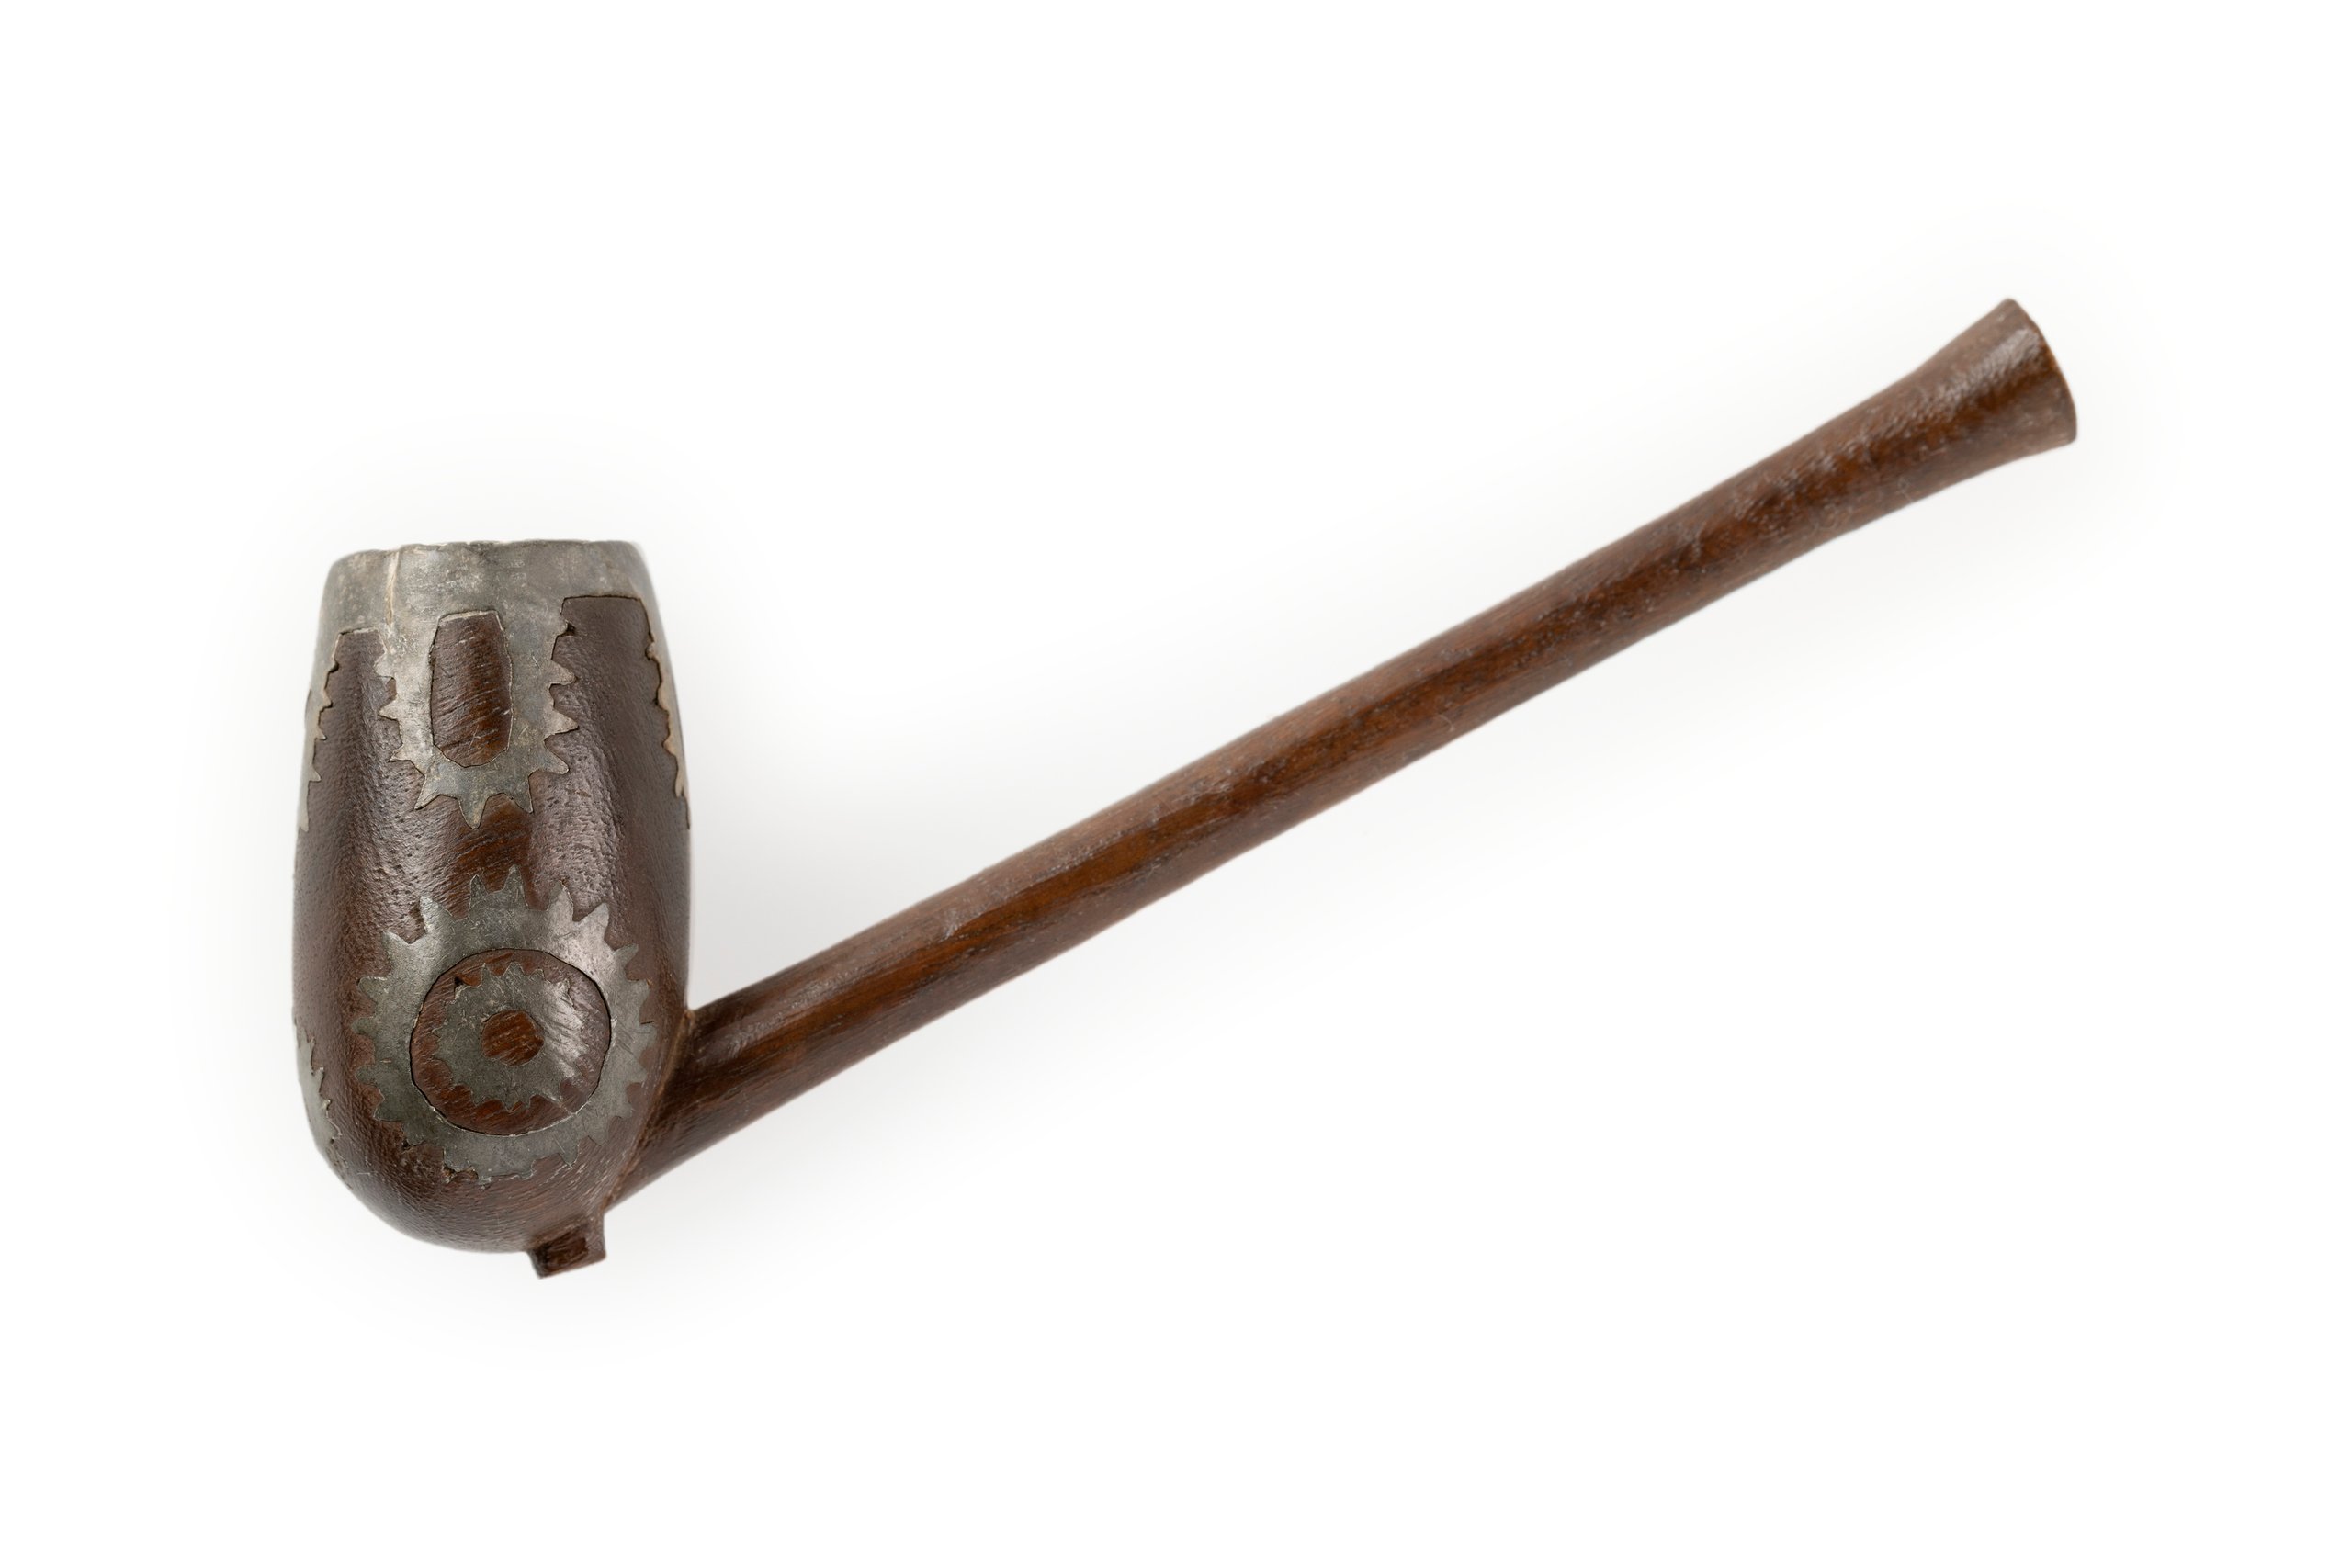 Wooden tobacco pipe decorated with lead